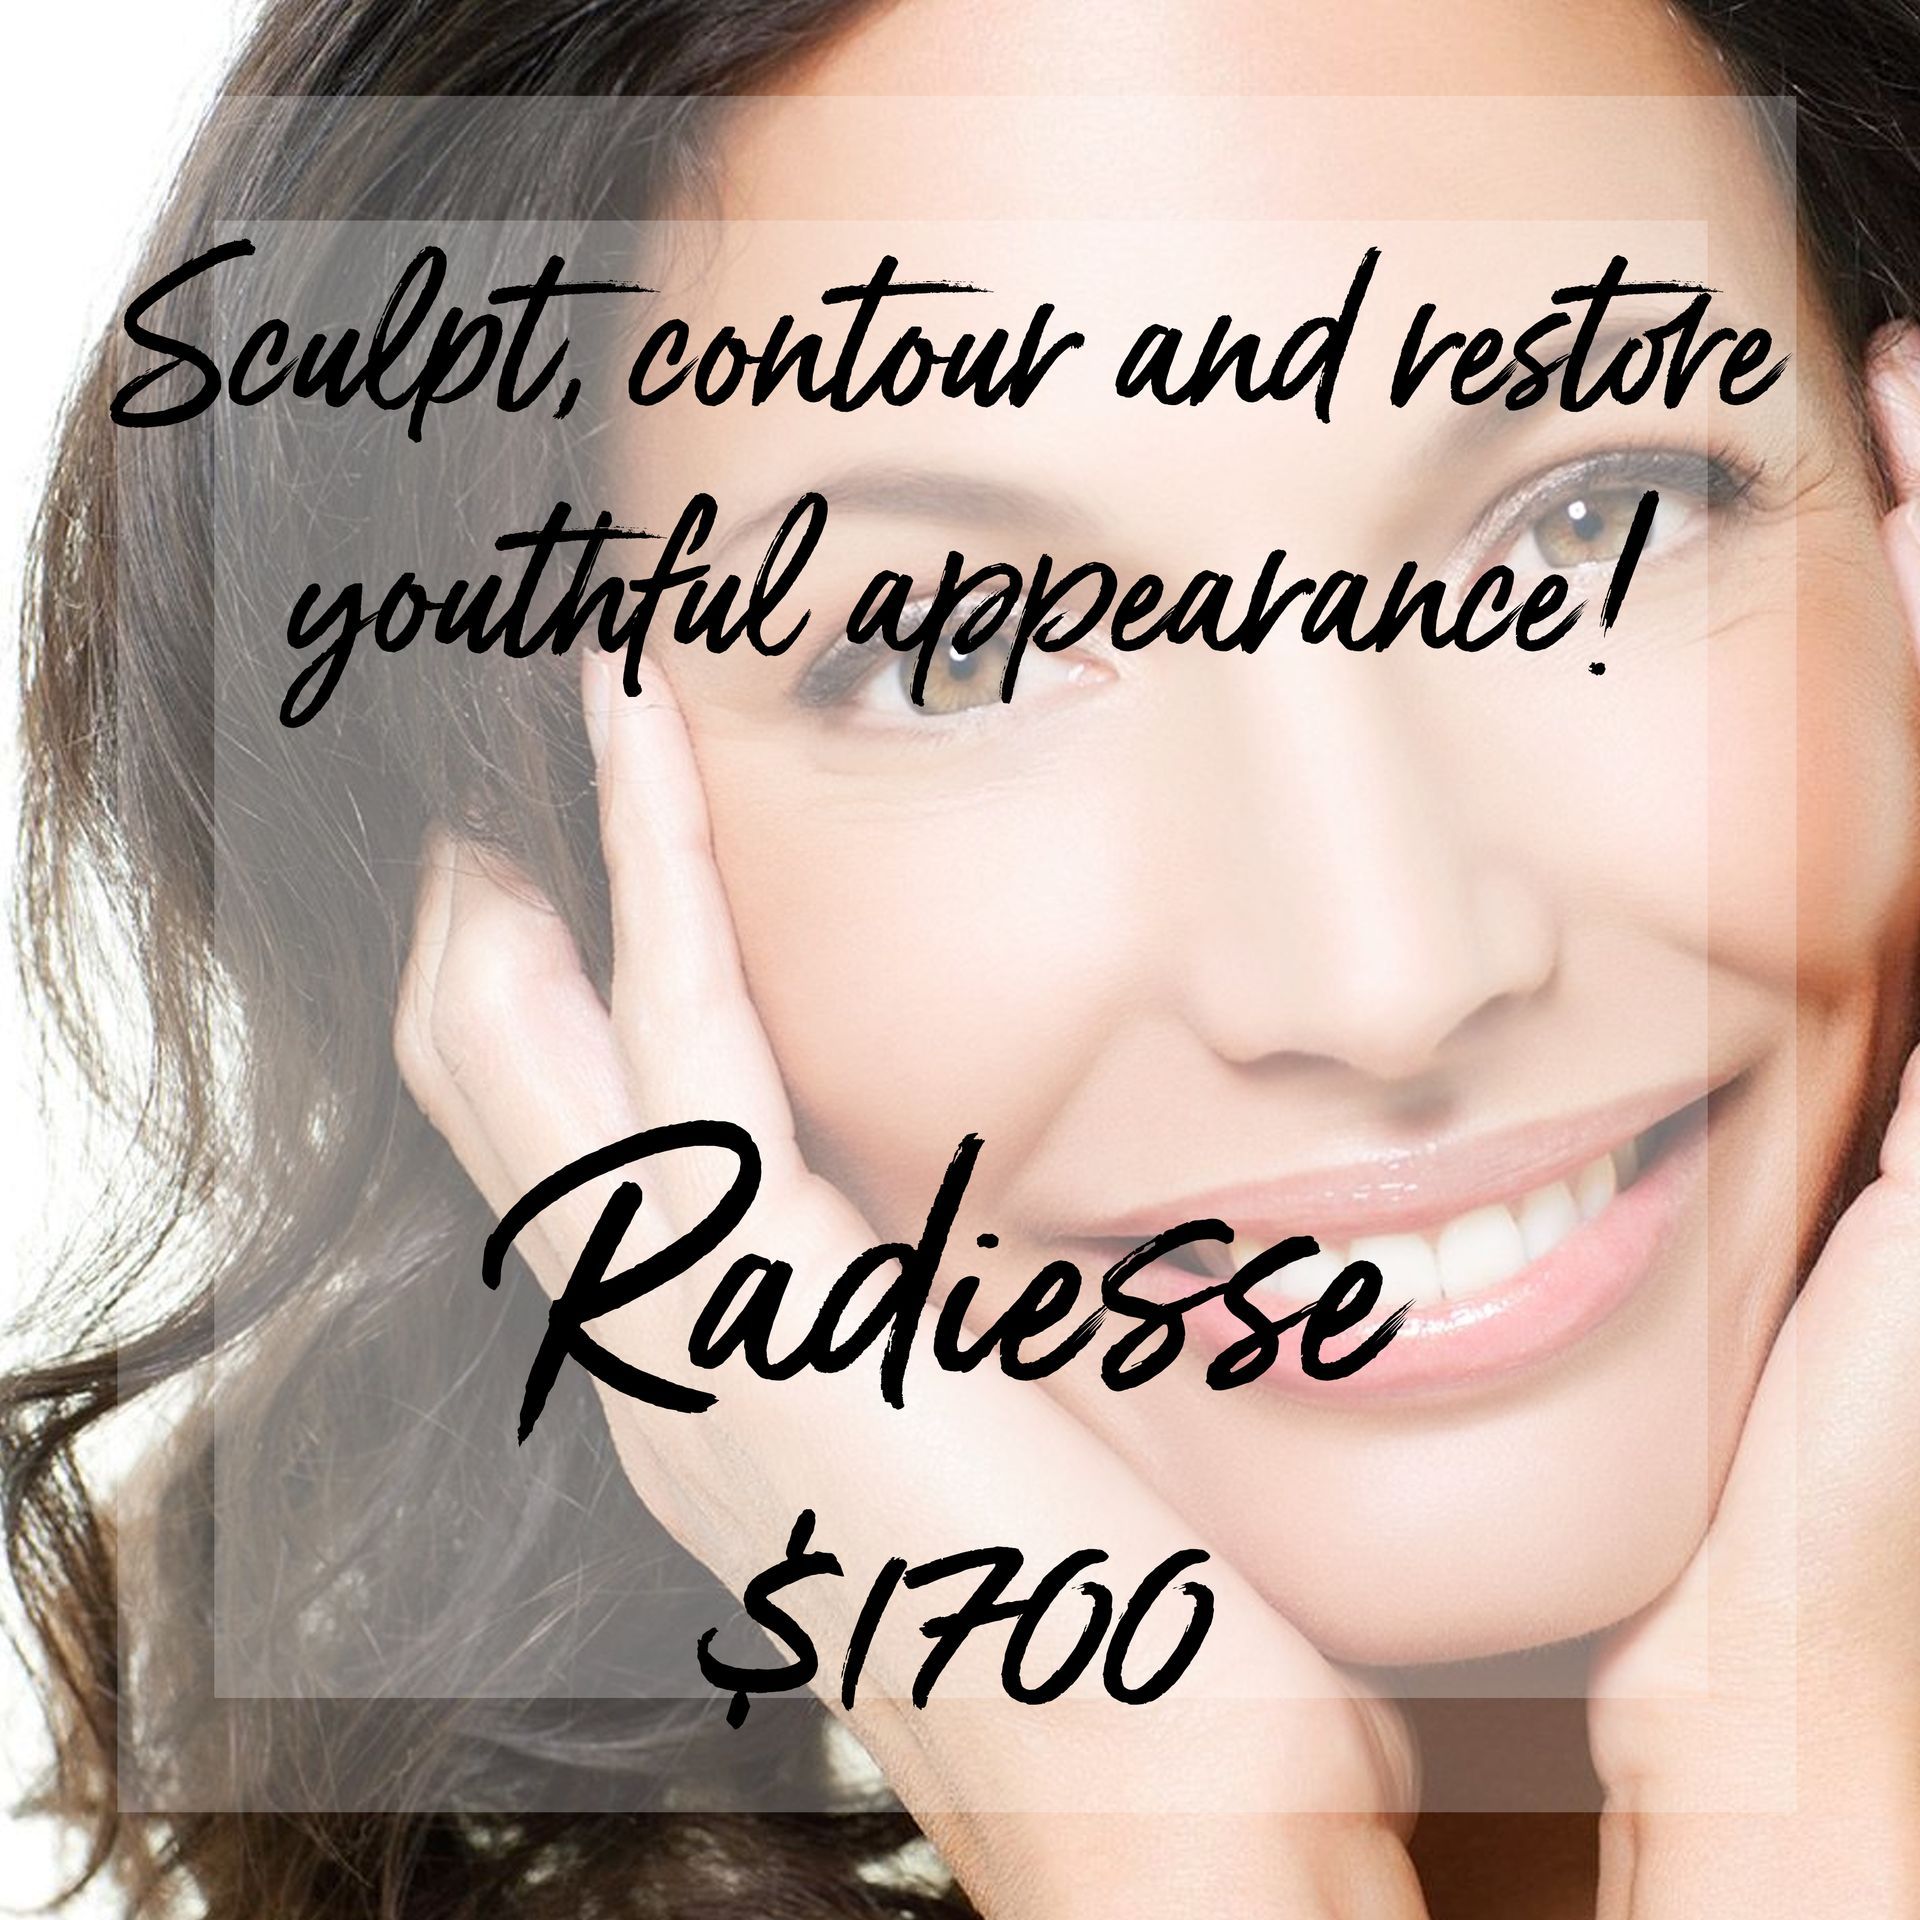 A woman is smiling with the words sculpt contour and restore youthful appearance radiesse $ 1700